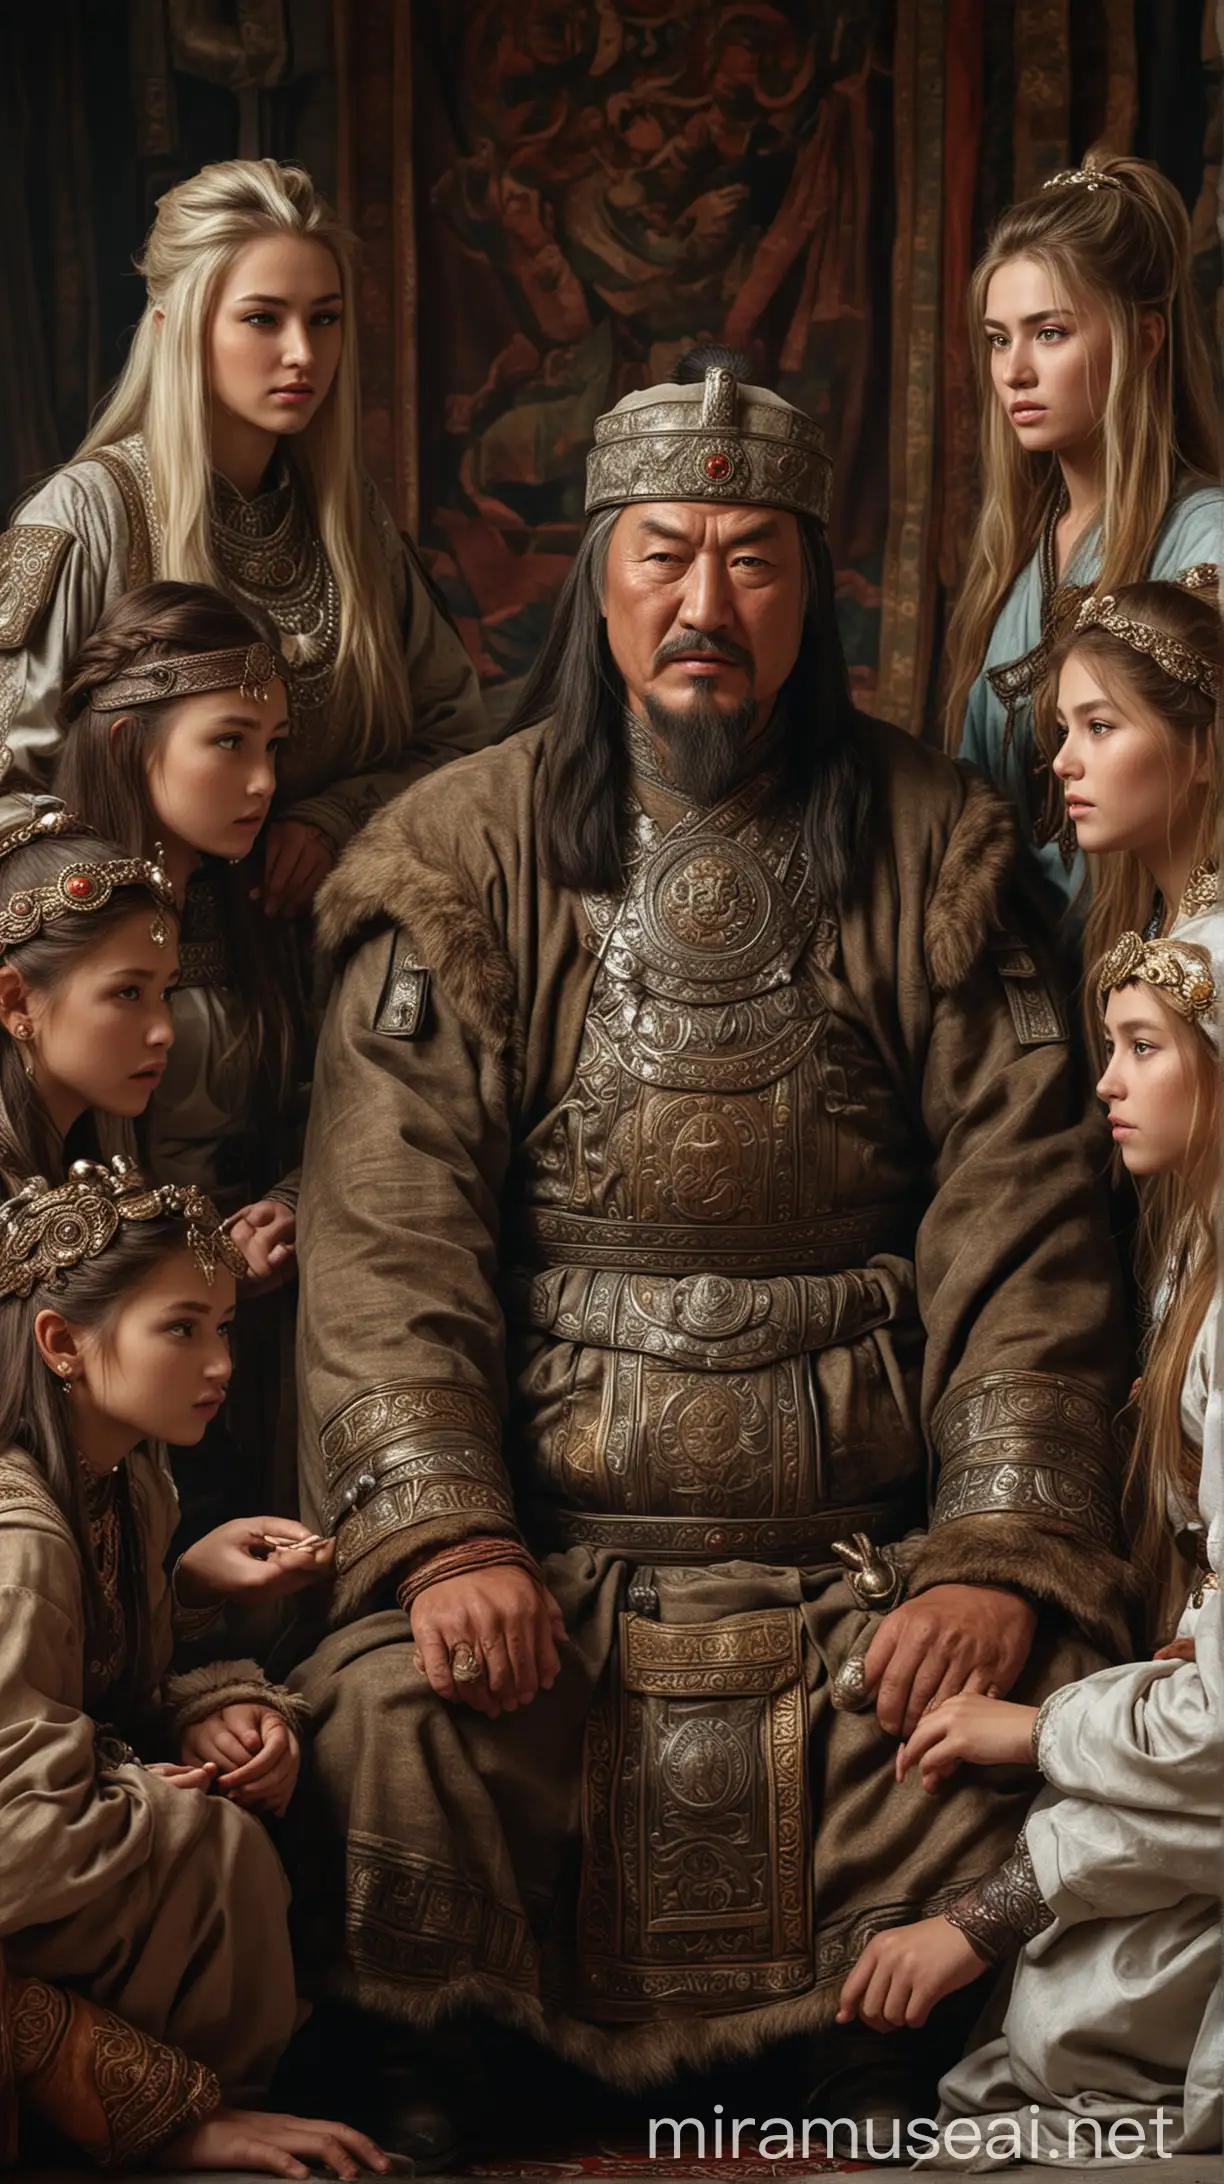 Genghis Khan surrounded by his daughters, discussing strategy. hyper realistic